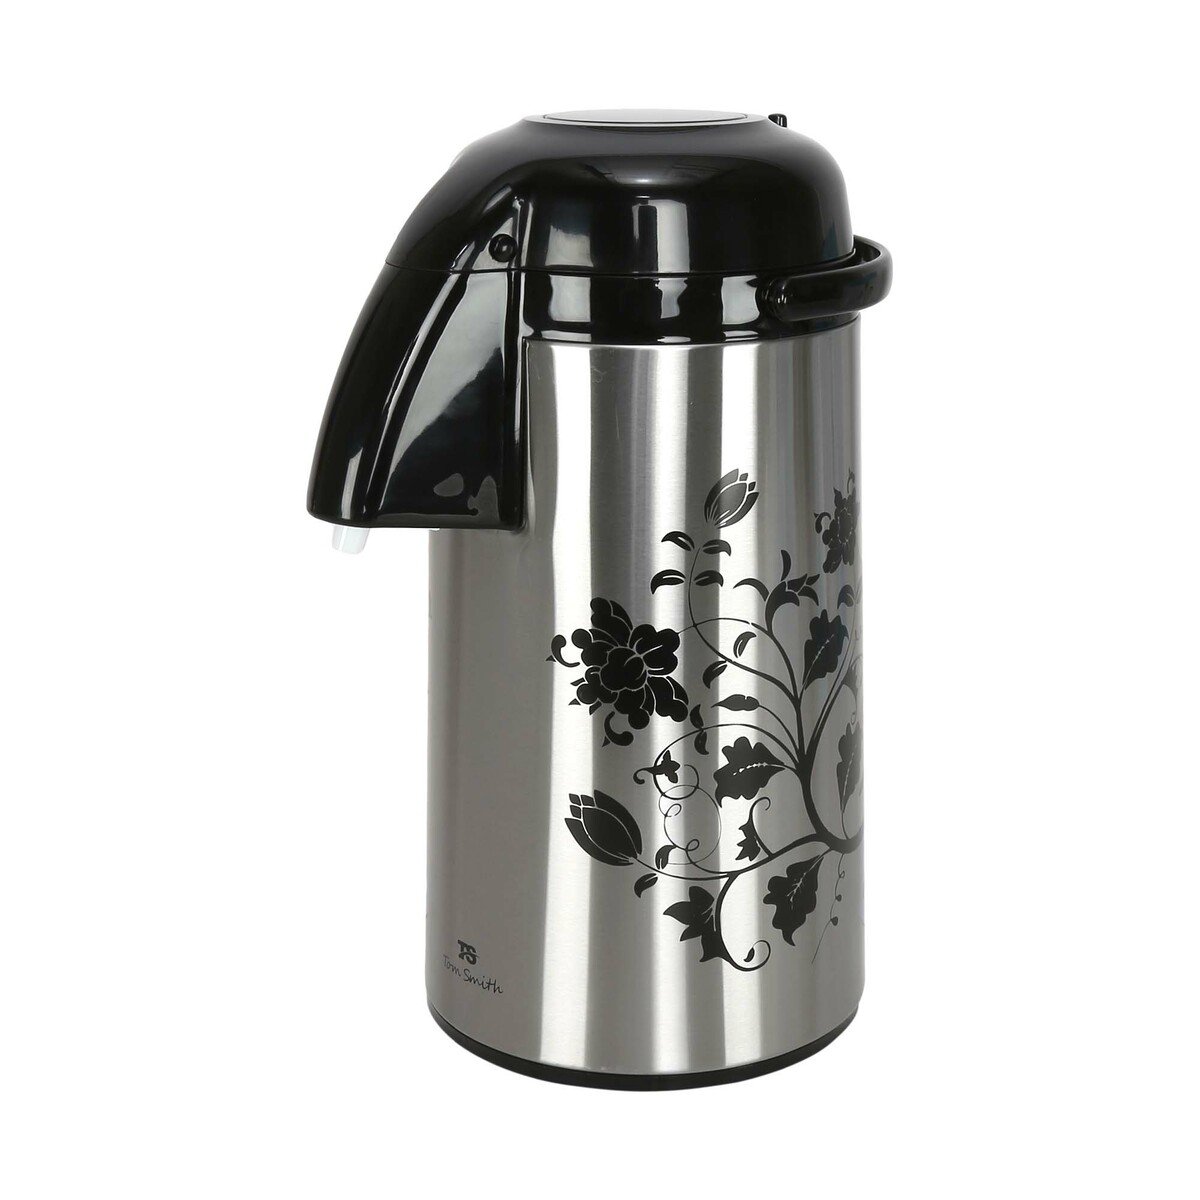 Tom Smith Stainless Steel AIRPOT Flask Flower F3006S 3Ltr